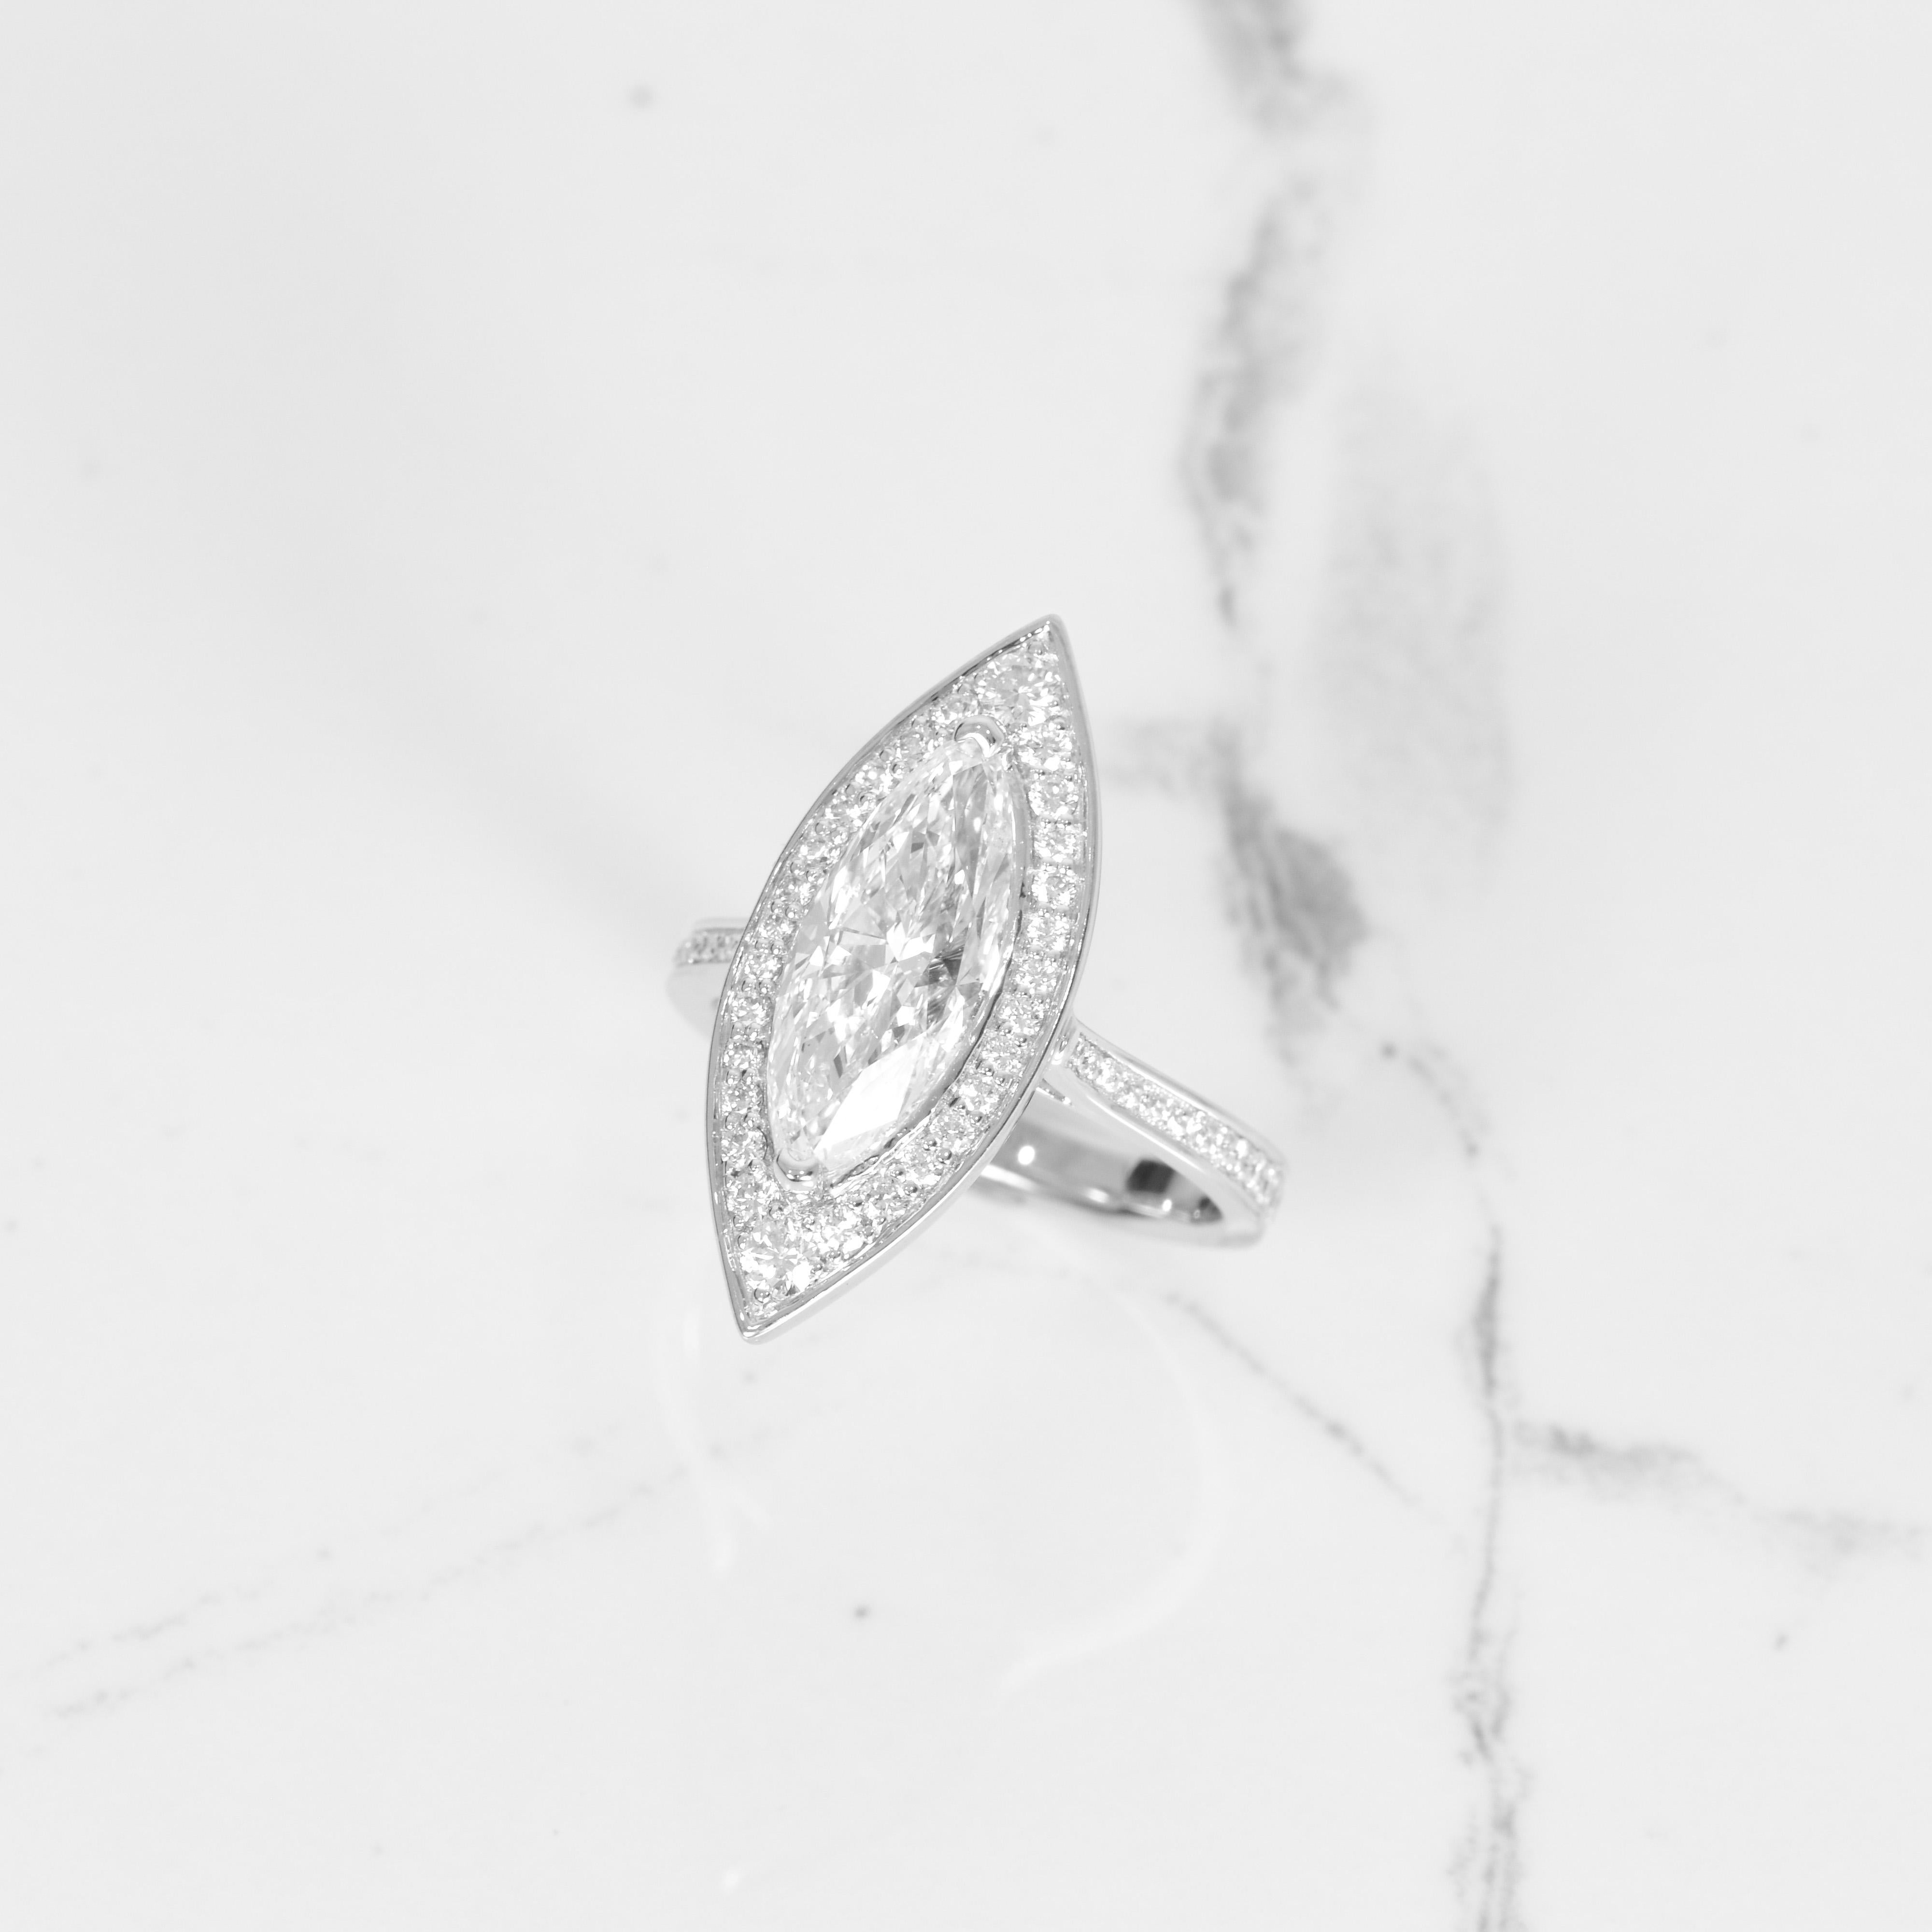 This ring is quite the showstopper! The center diamond is a gorgeous GIA certified 3.03ct marquise diamond that is G in color with SI2 clarity. Surrounding the stunning stone is .55 carats of diamonds, all beautifully set in 14k white gold. The top